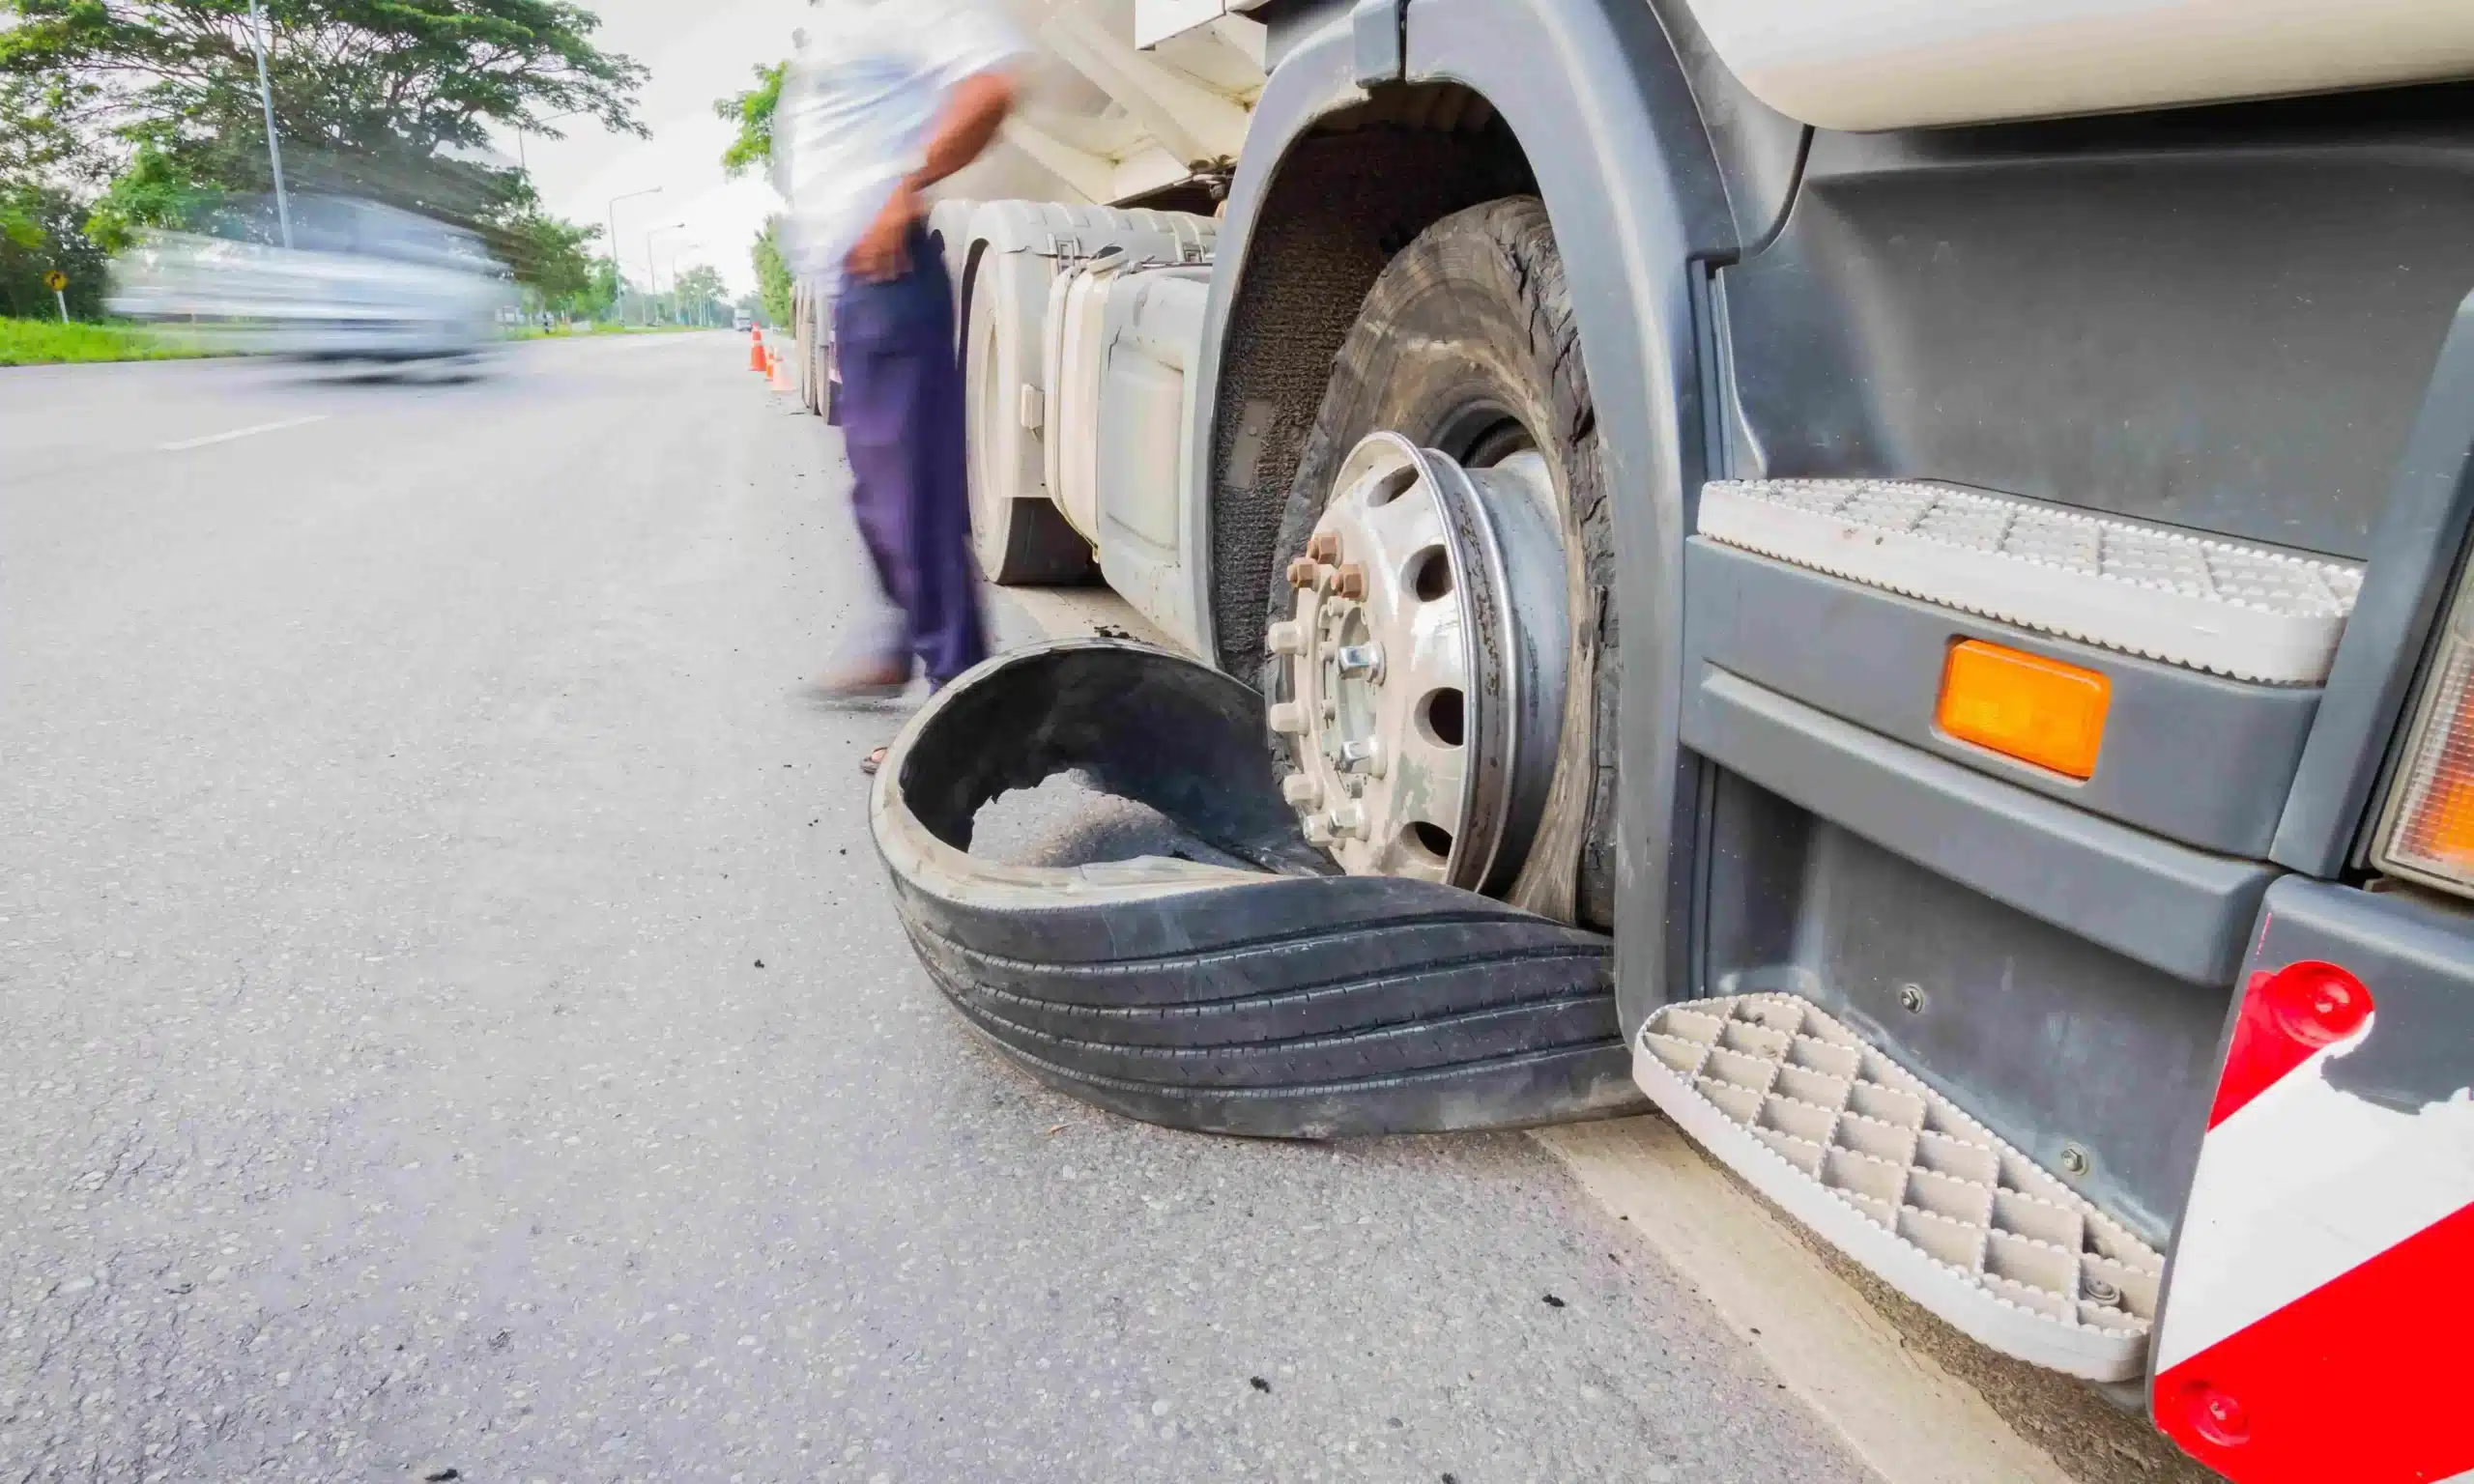 An eighteen-wheel semi truck with a flat tire after an accident on a road.